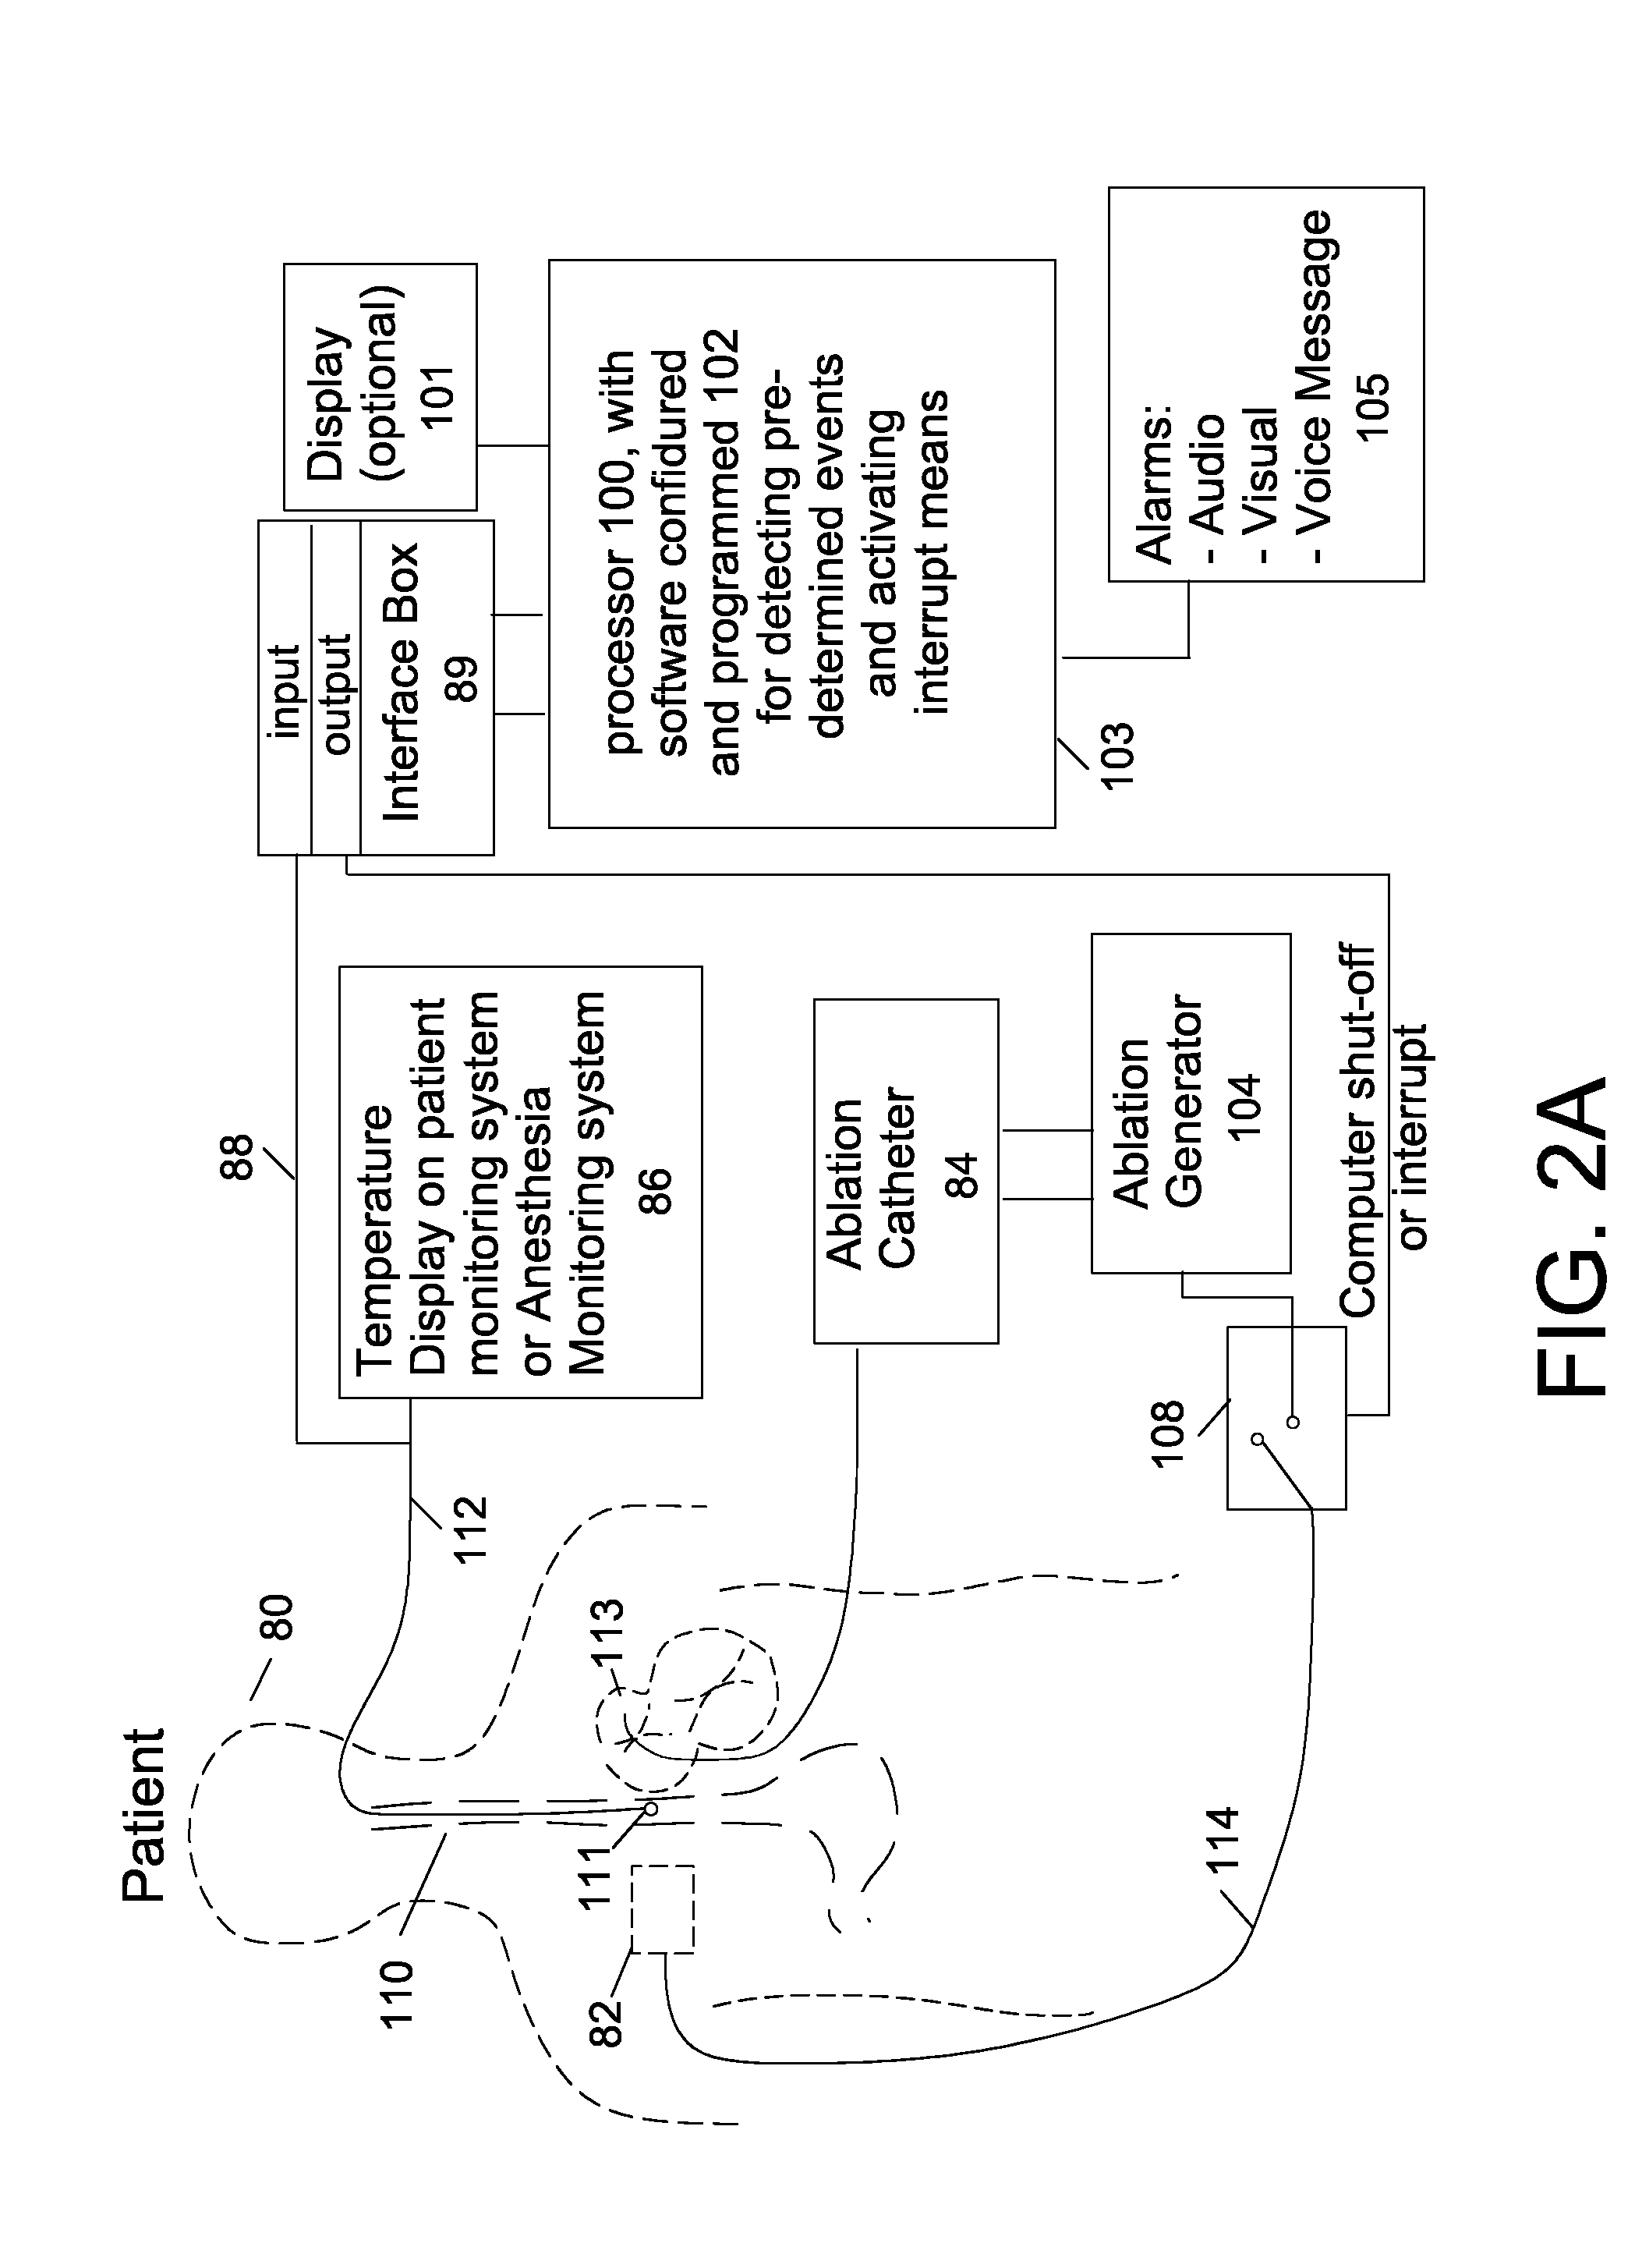 Methods and systems of temperature based alarms, esophageal cooling and/or automatic interrupt (shut-off) during a cardic ablation procedure